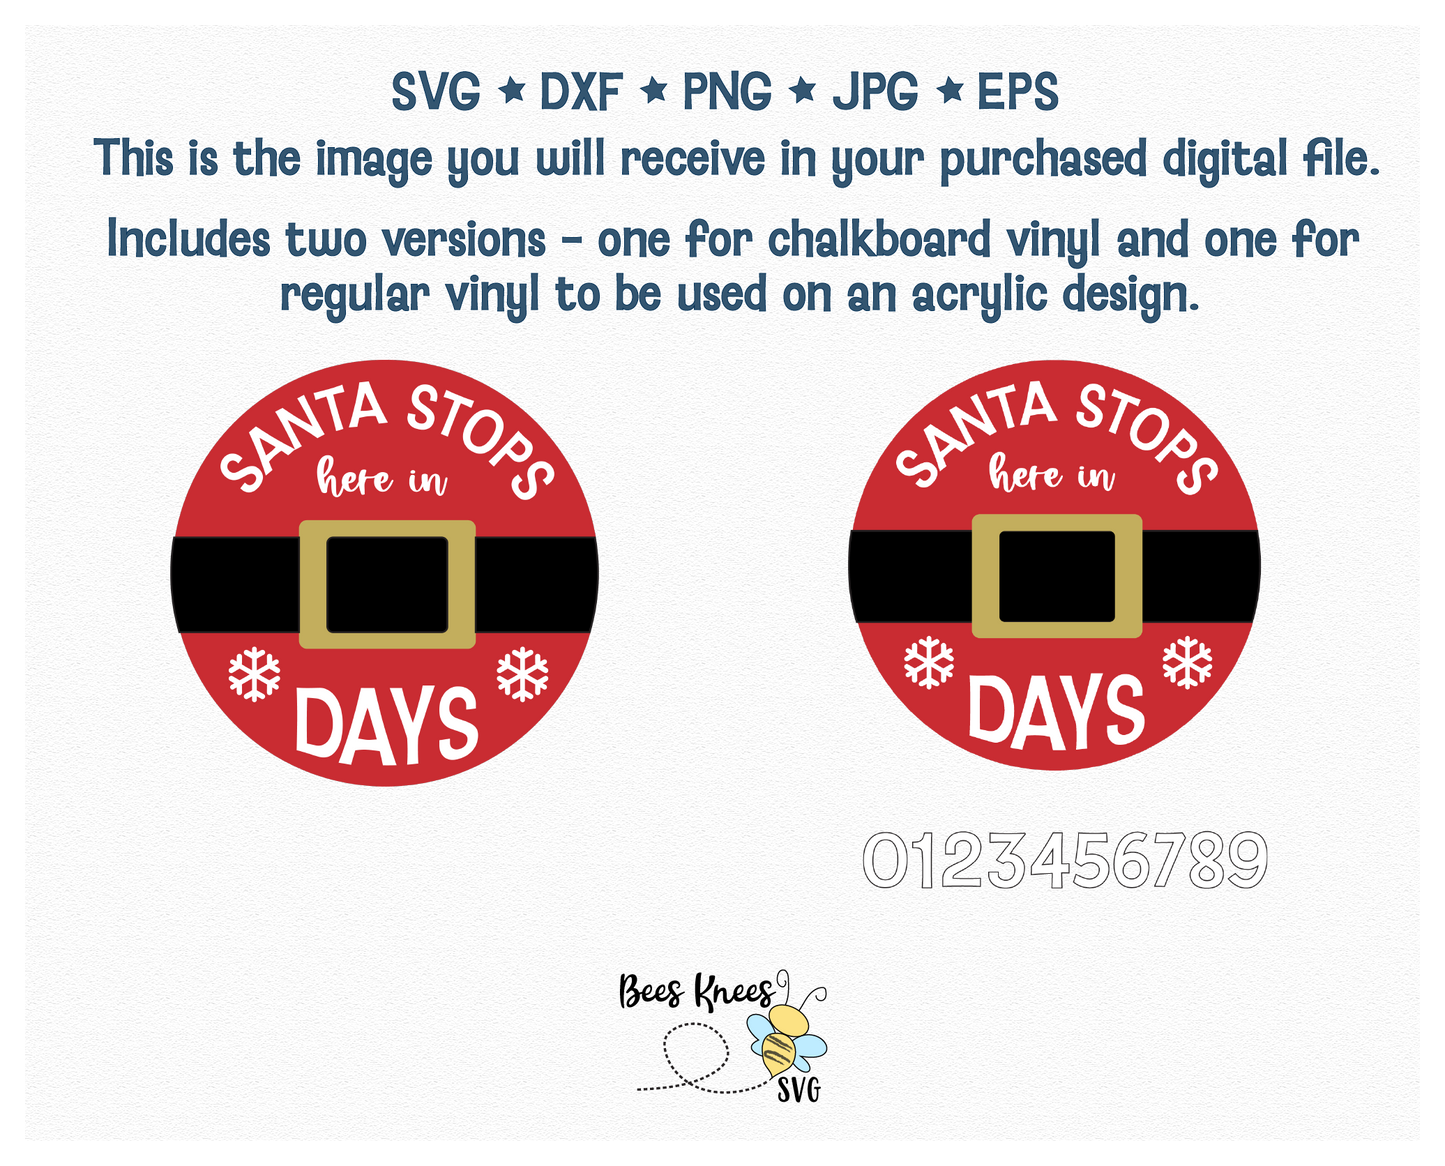 Countdown to Christmas Ornament or Sign SVG File